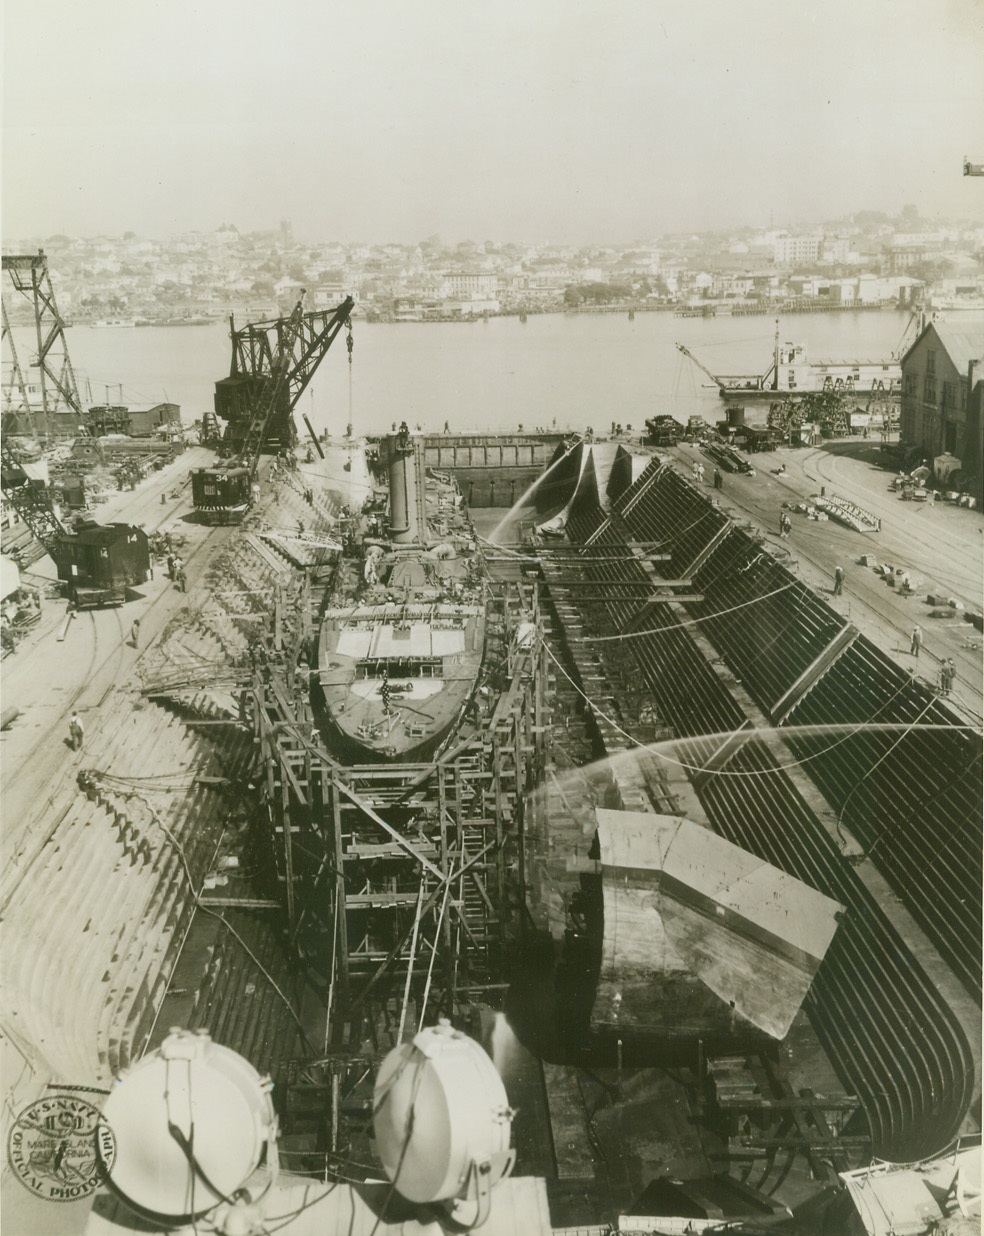 USS SHAW TAKE A BOW, 3/9/1942. AT A PACIFIC COAST NAVY YARD – The Destroyer USS Shaw is whole once again. The long, lean “sea greyhound” is shown in drydock with a new forward section to replace the temporary snub bow (right foreground) which was fitted to the vessel after damage suffered in the Japanese attack on Pearl Harbor on Dec. 7. The Destroyer arrived here under her own power. Credit: U.S. Navy photo via OWI Radiophoto from ACME;